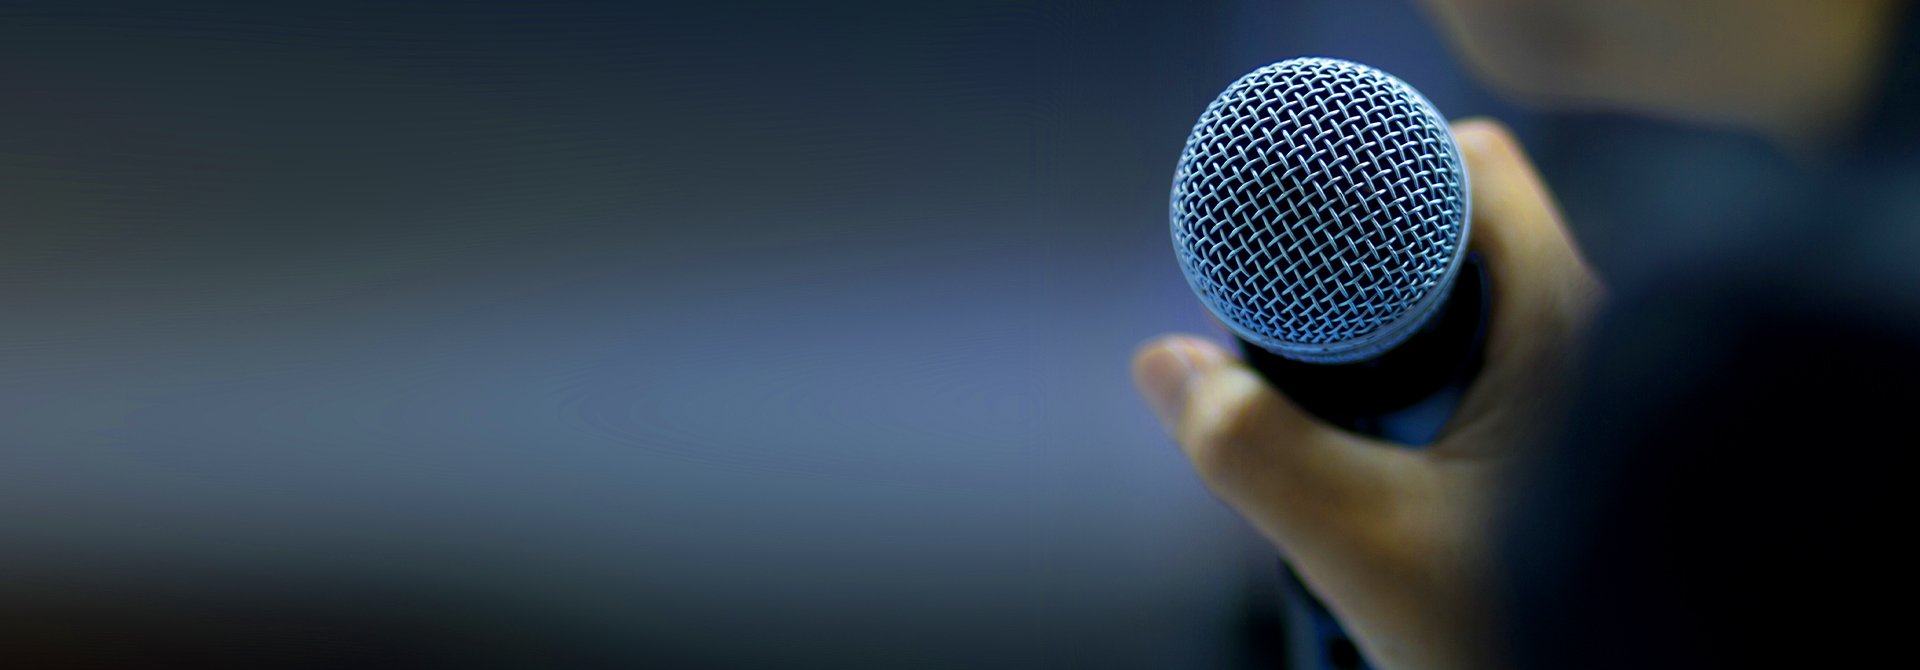 Effective Presentations And Public Speaking